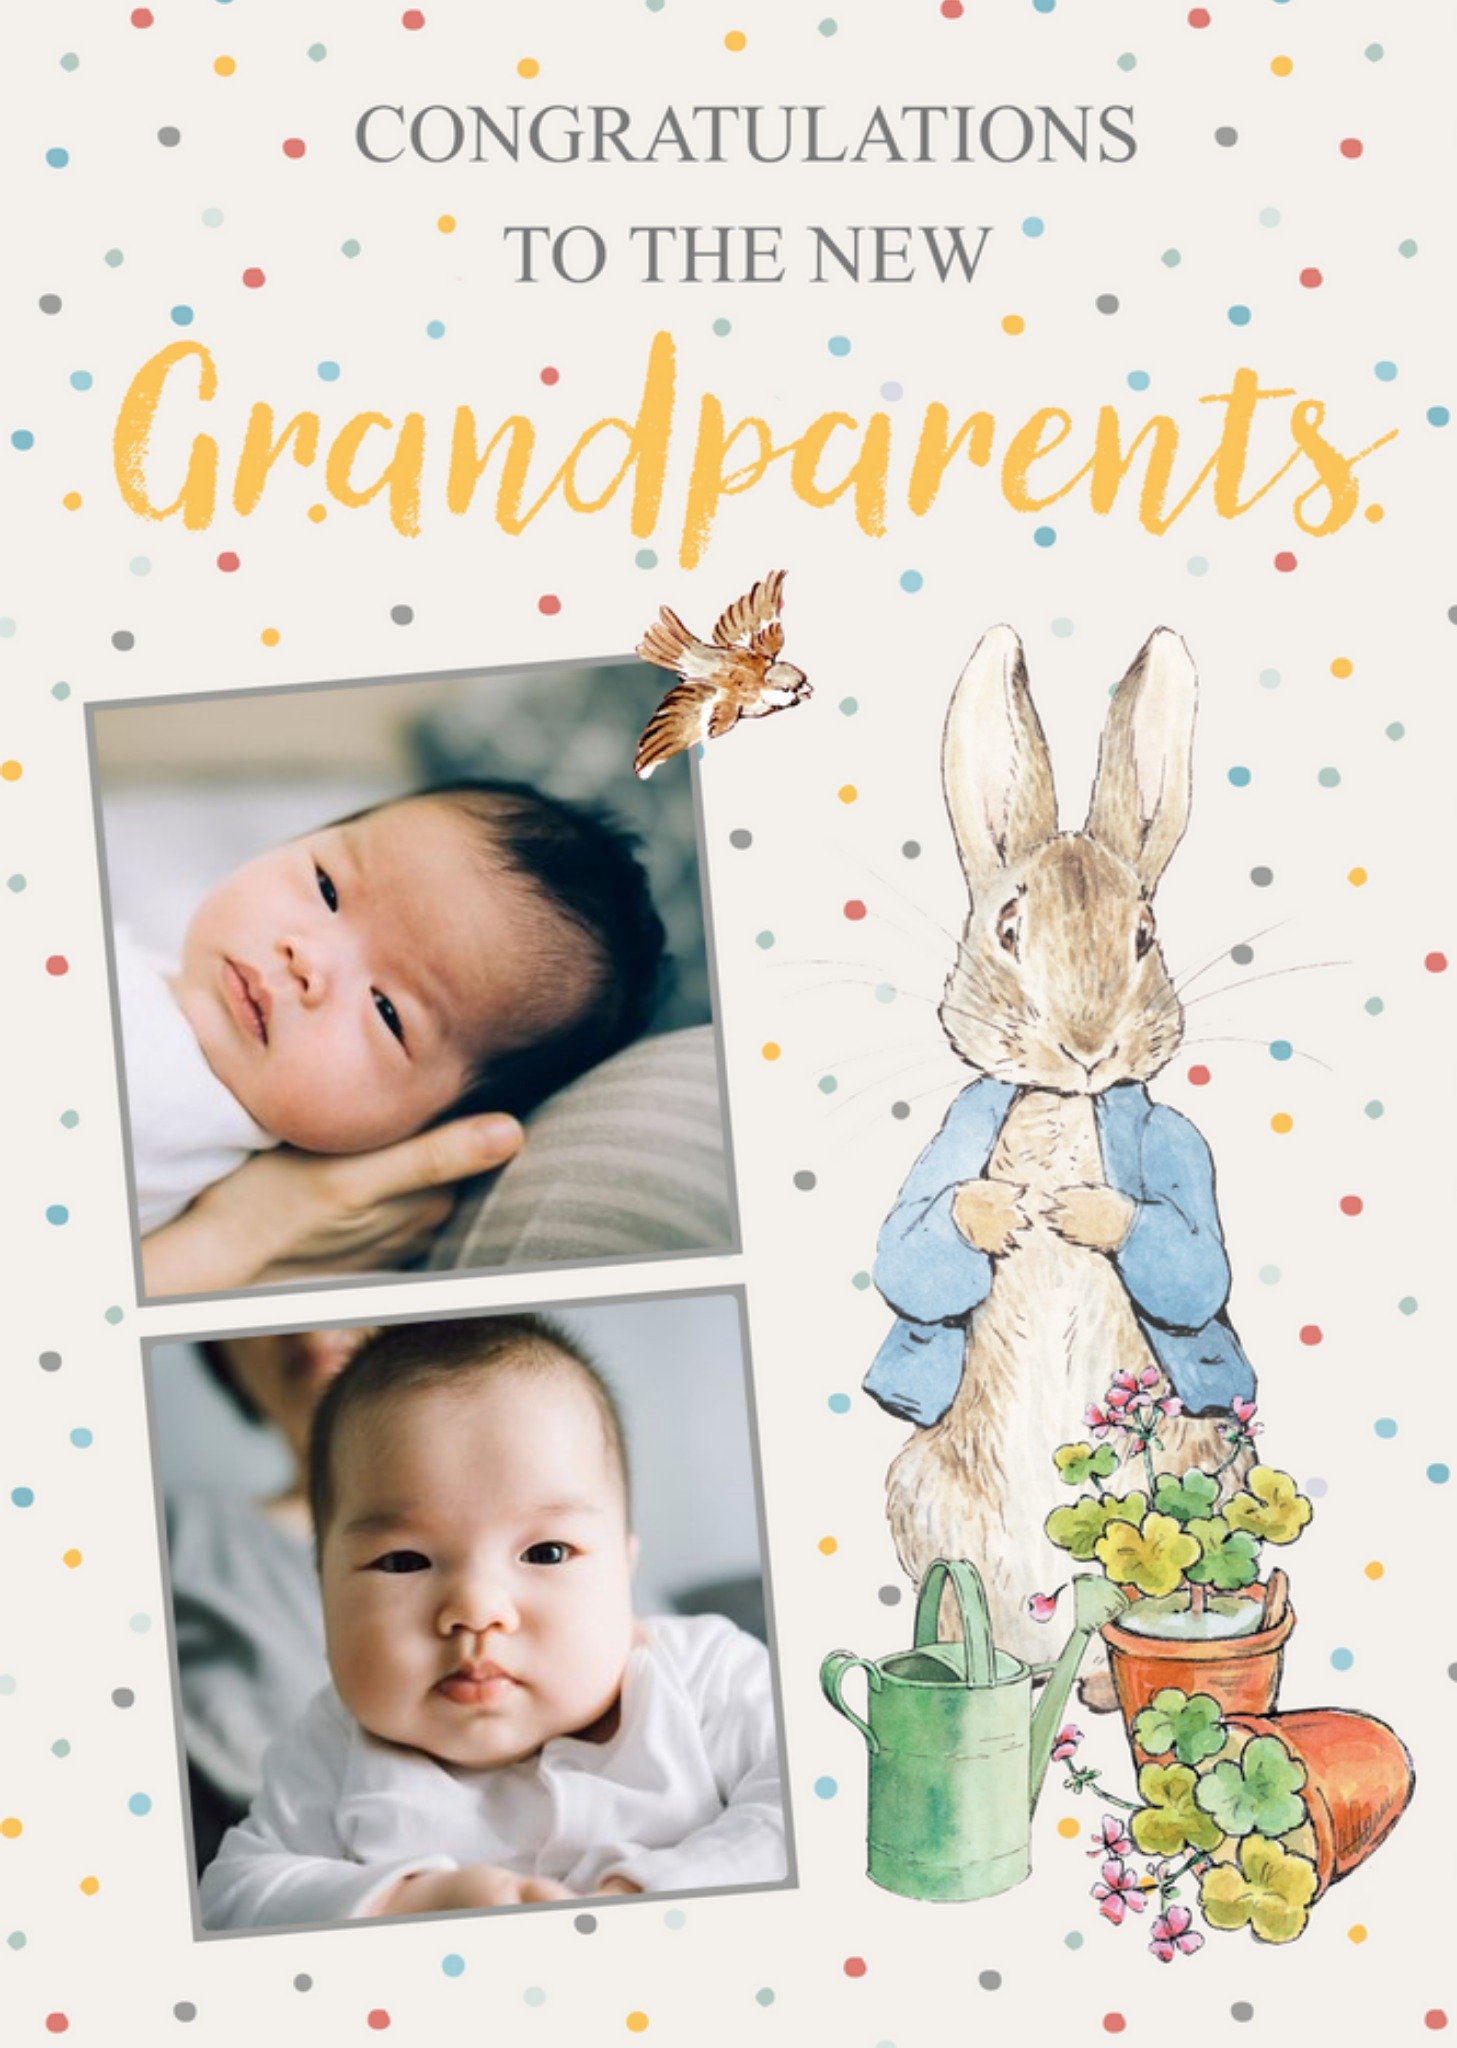 Peter Rabbit Congratulations To The New Grandparents Photo Upload New Baby Card, Large